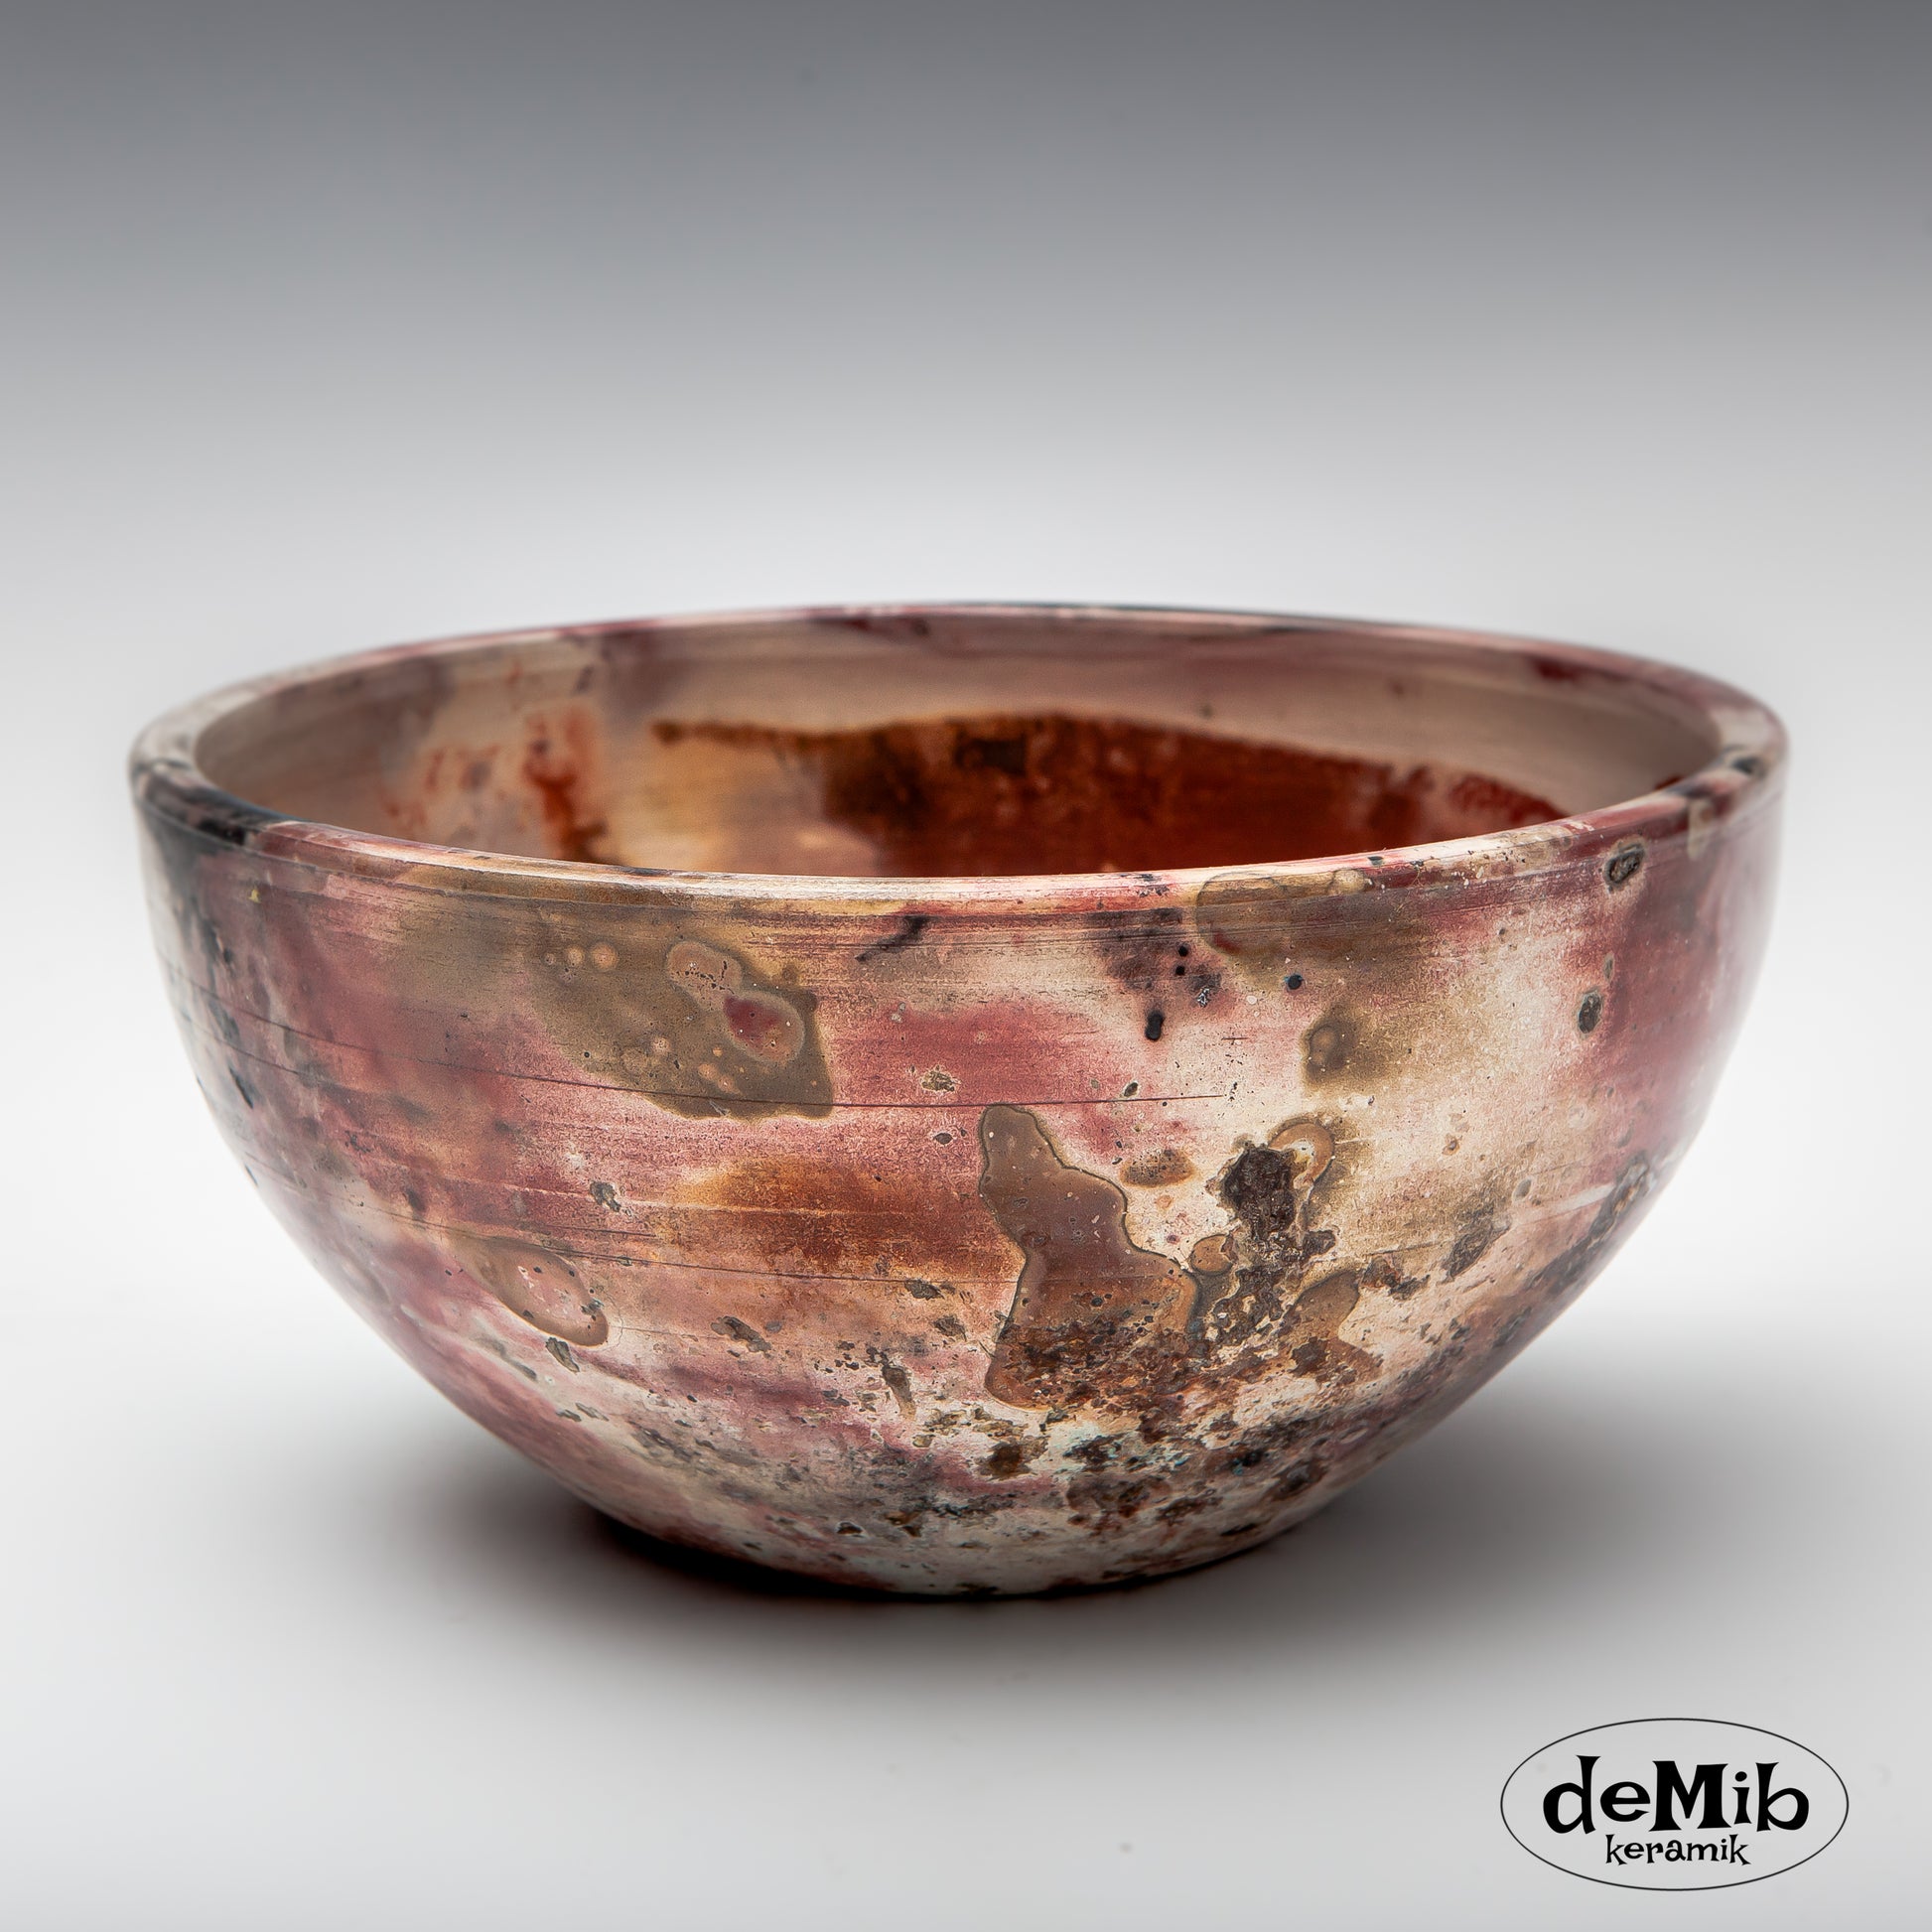 Large Pit Fired Bowl in Porcelain (21 cm wide)